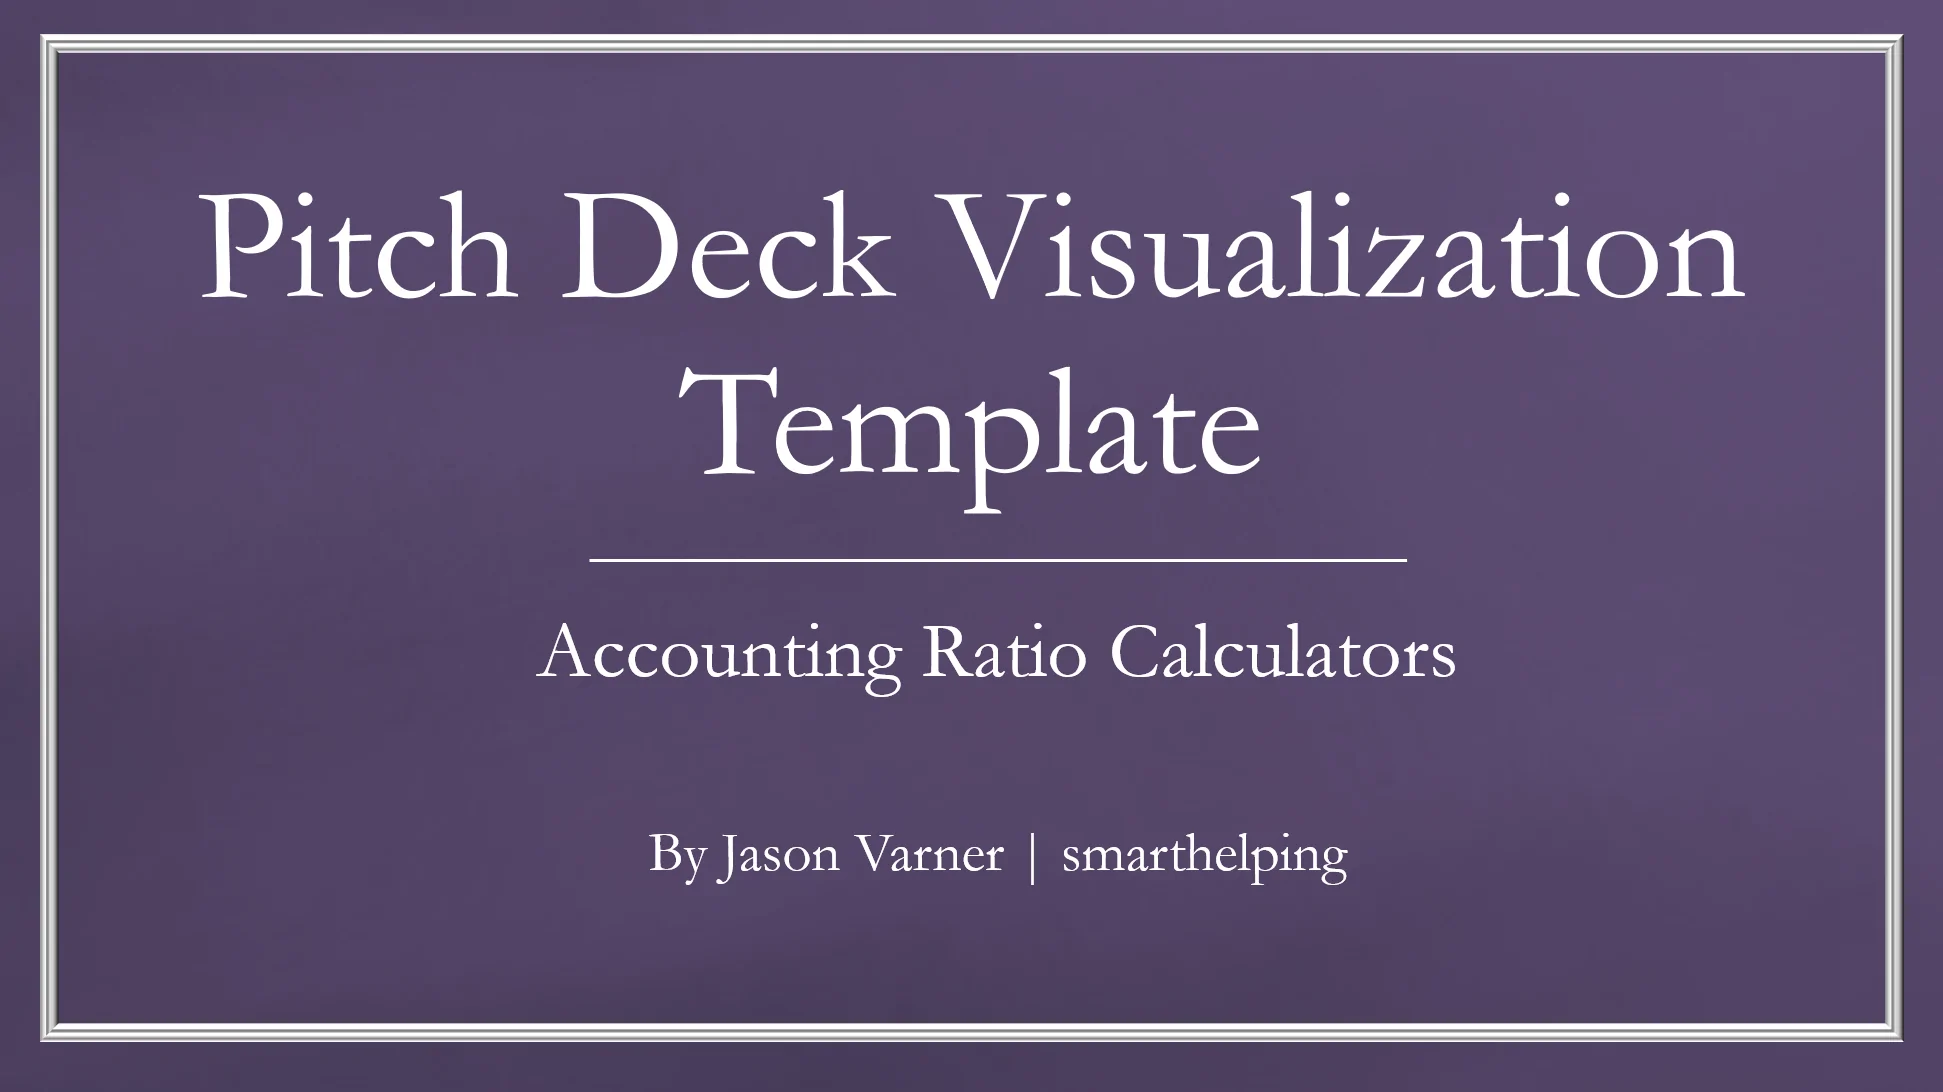 Pitch Deck Financial Visualizations Template